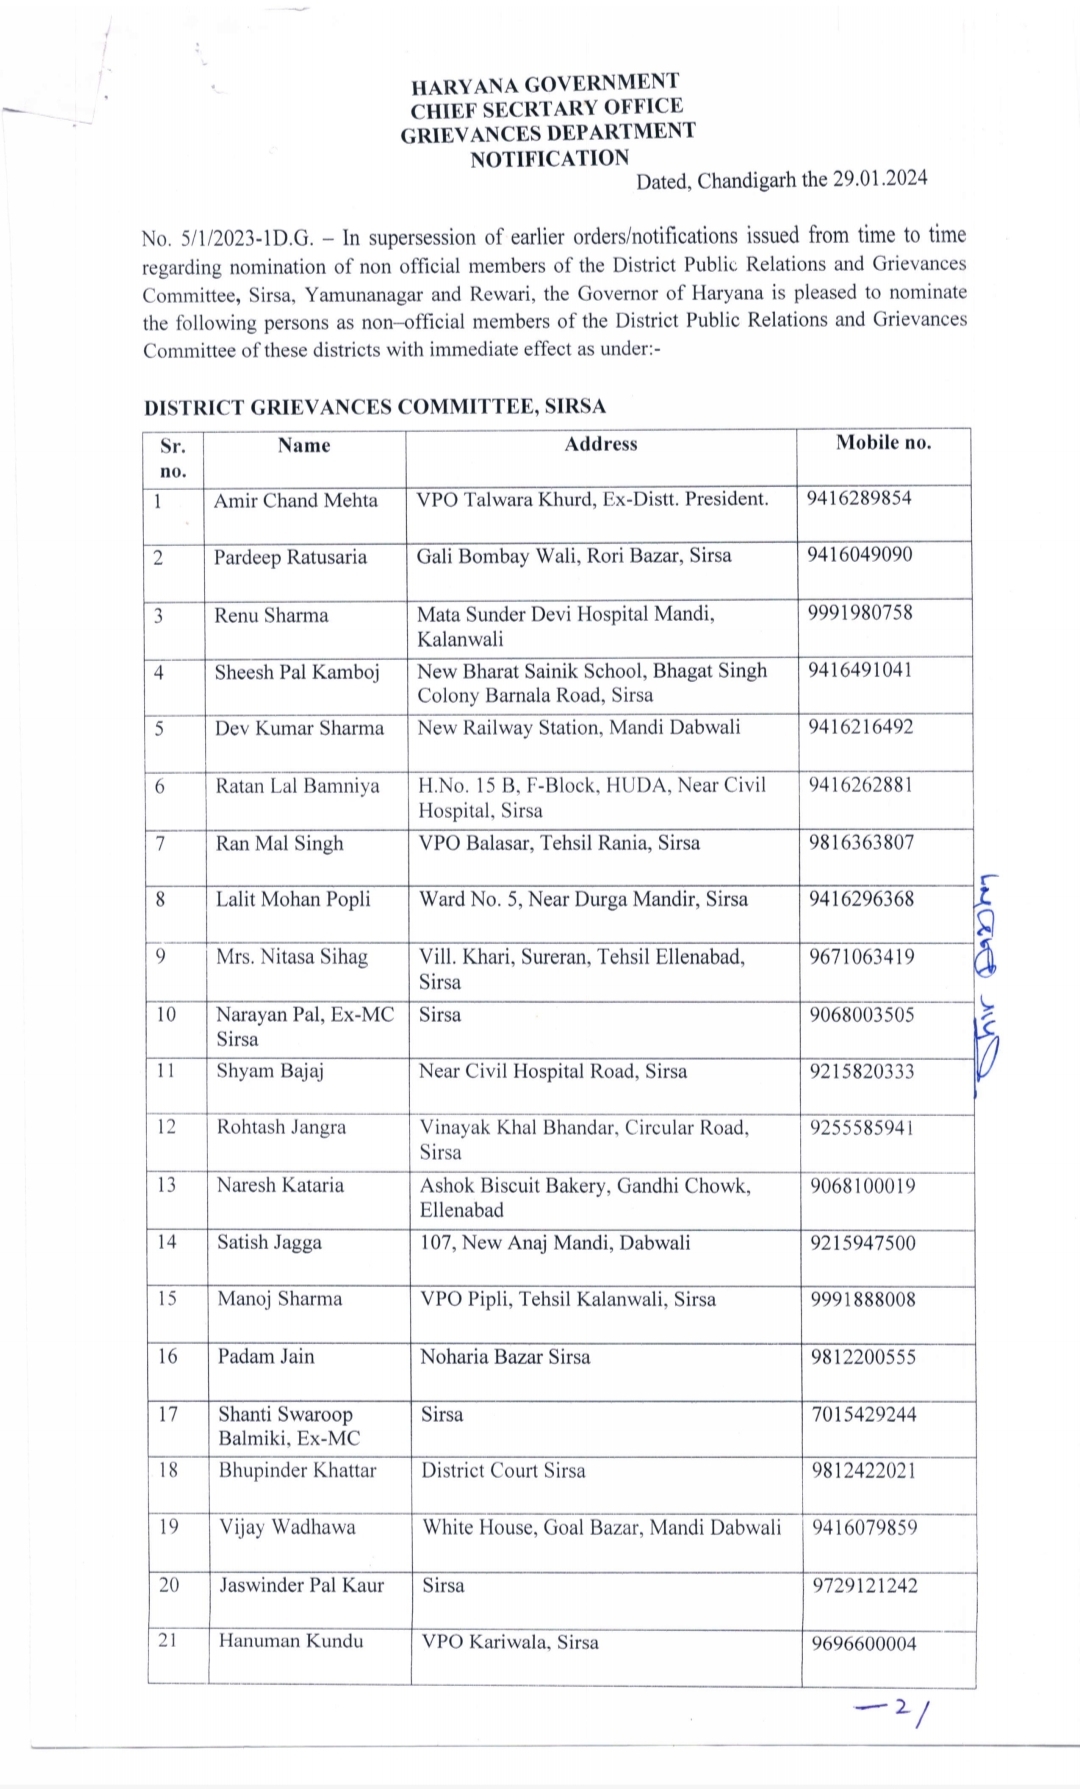 Haryana Government released the list of members of Grievance Redressal Committee, know whose names are there